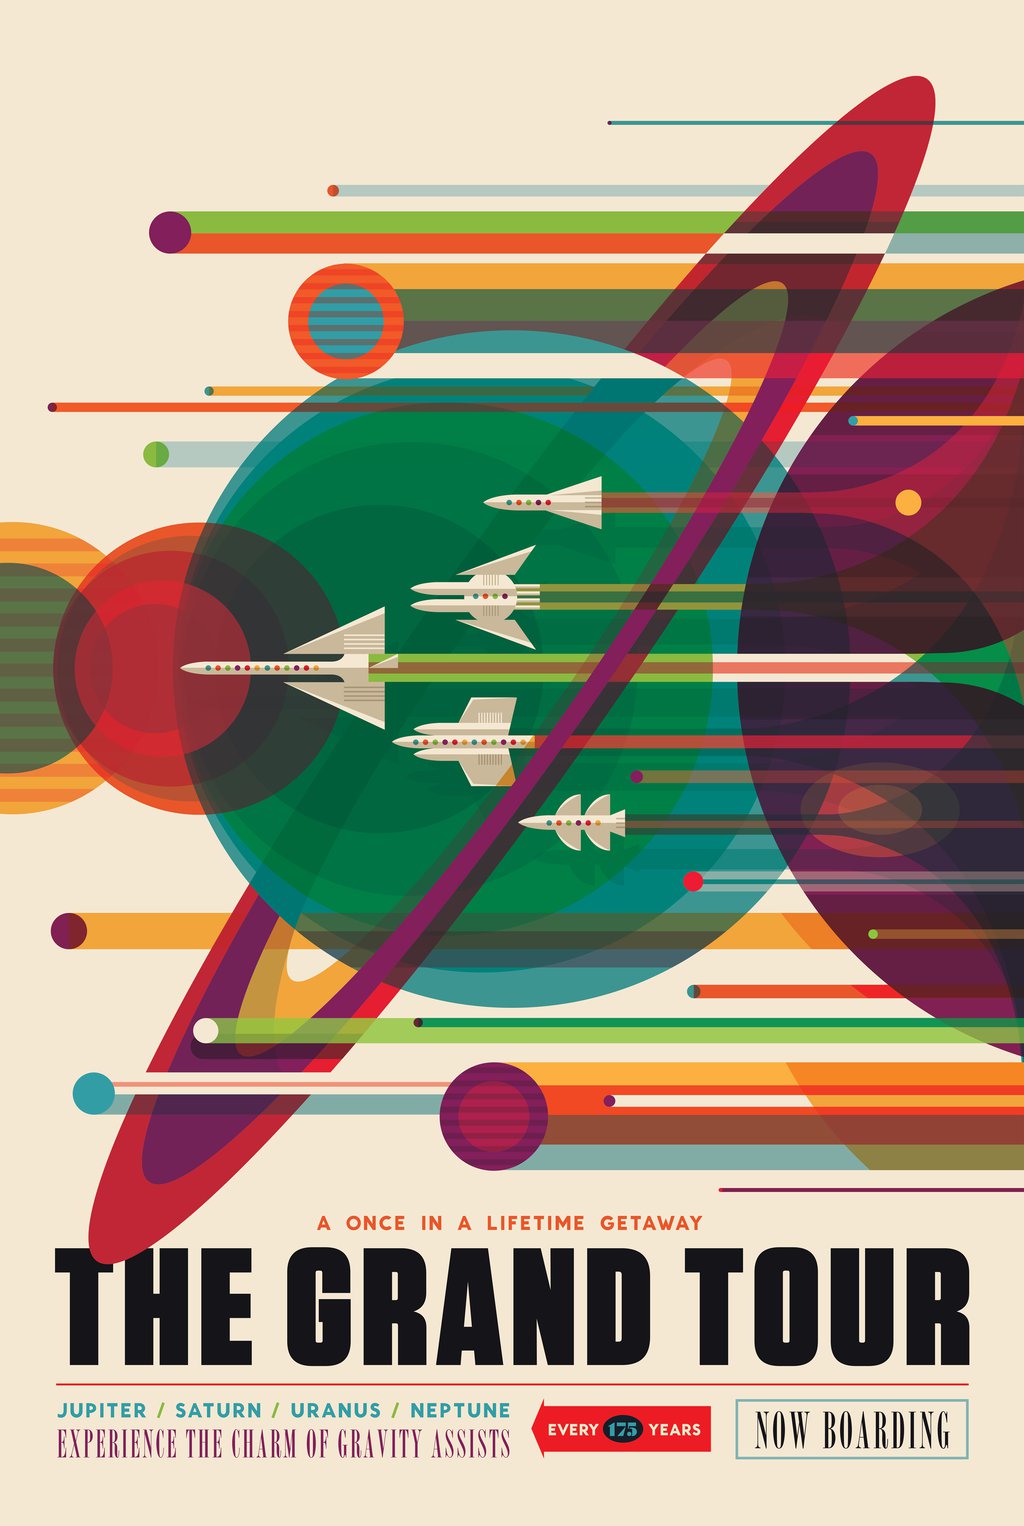 The Grand Tour - JPL Travel Poster - Visions of the Future Collection